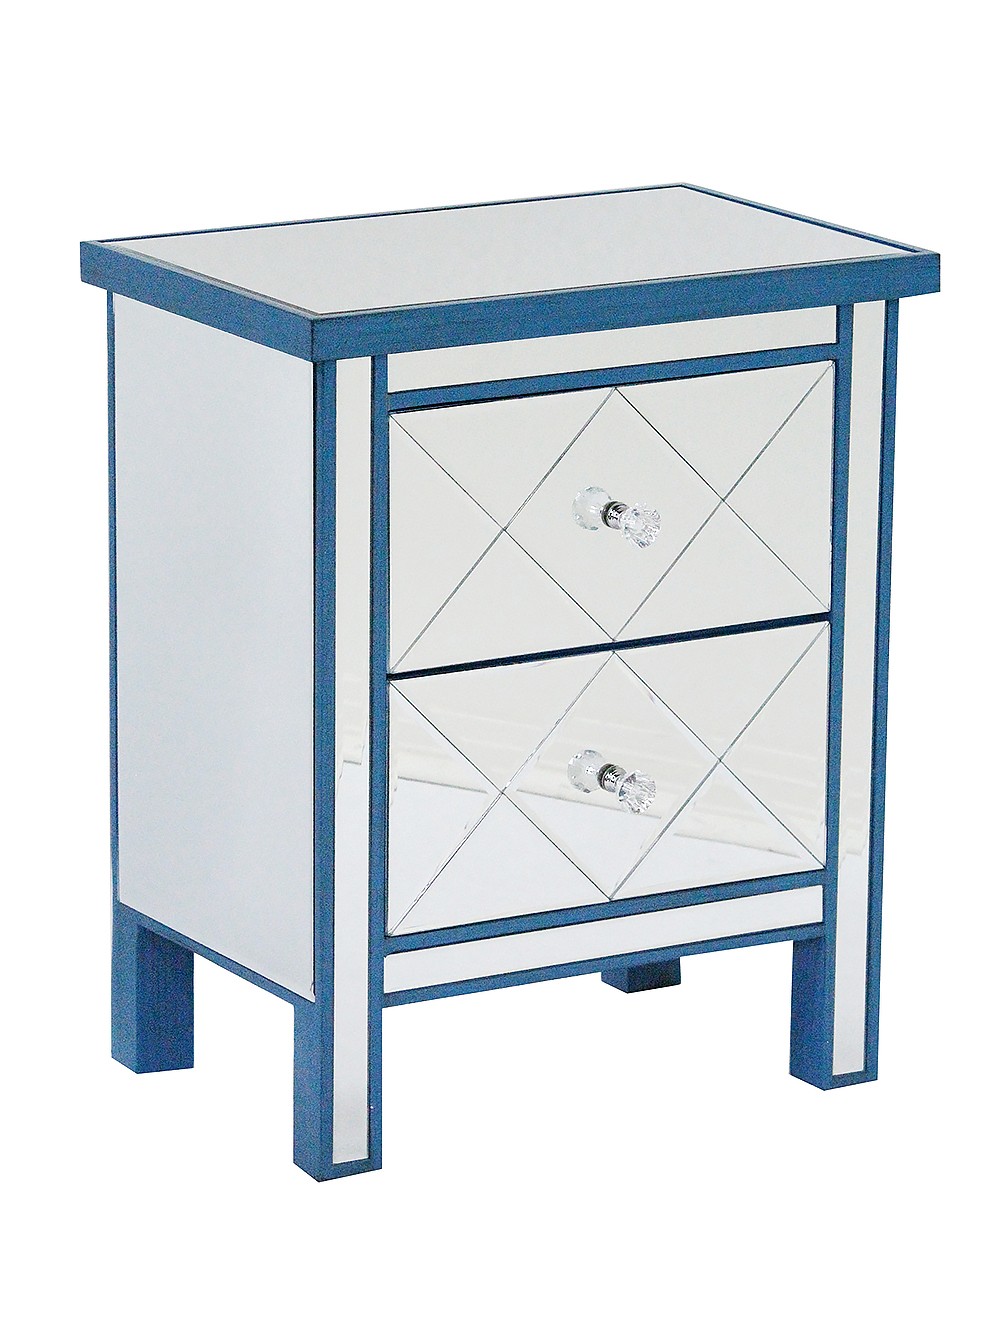 20" X 13" X 25.75" Blue MDF Wood Mirrored Glass Accent Cabinet with Beveled Glass Drawers